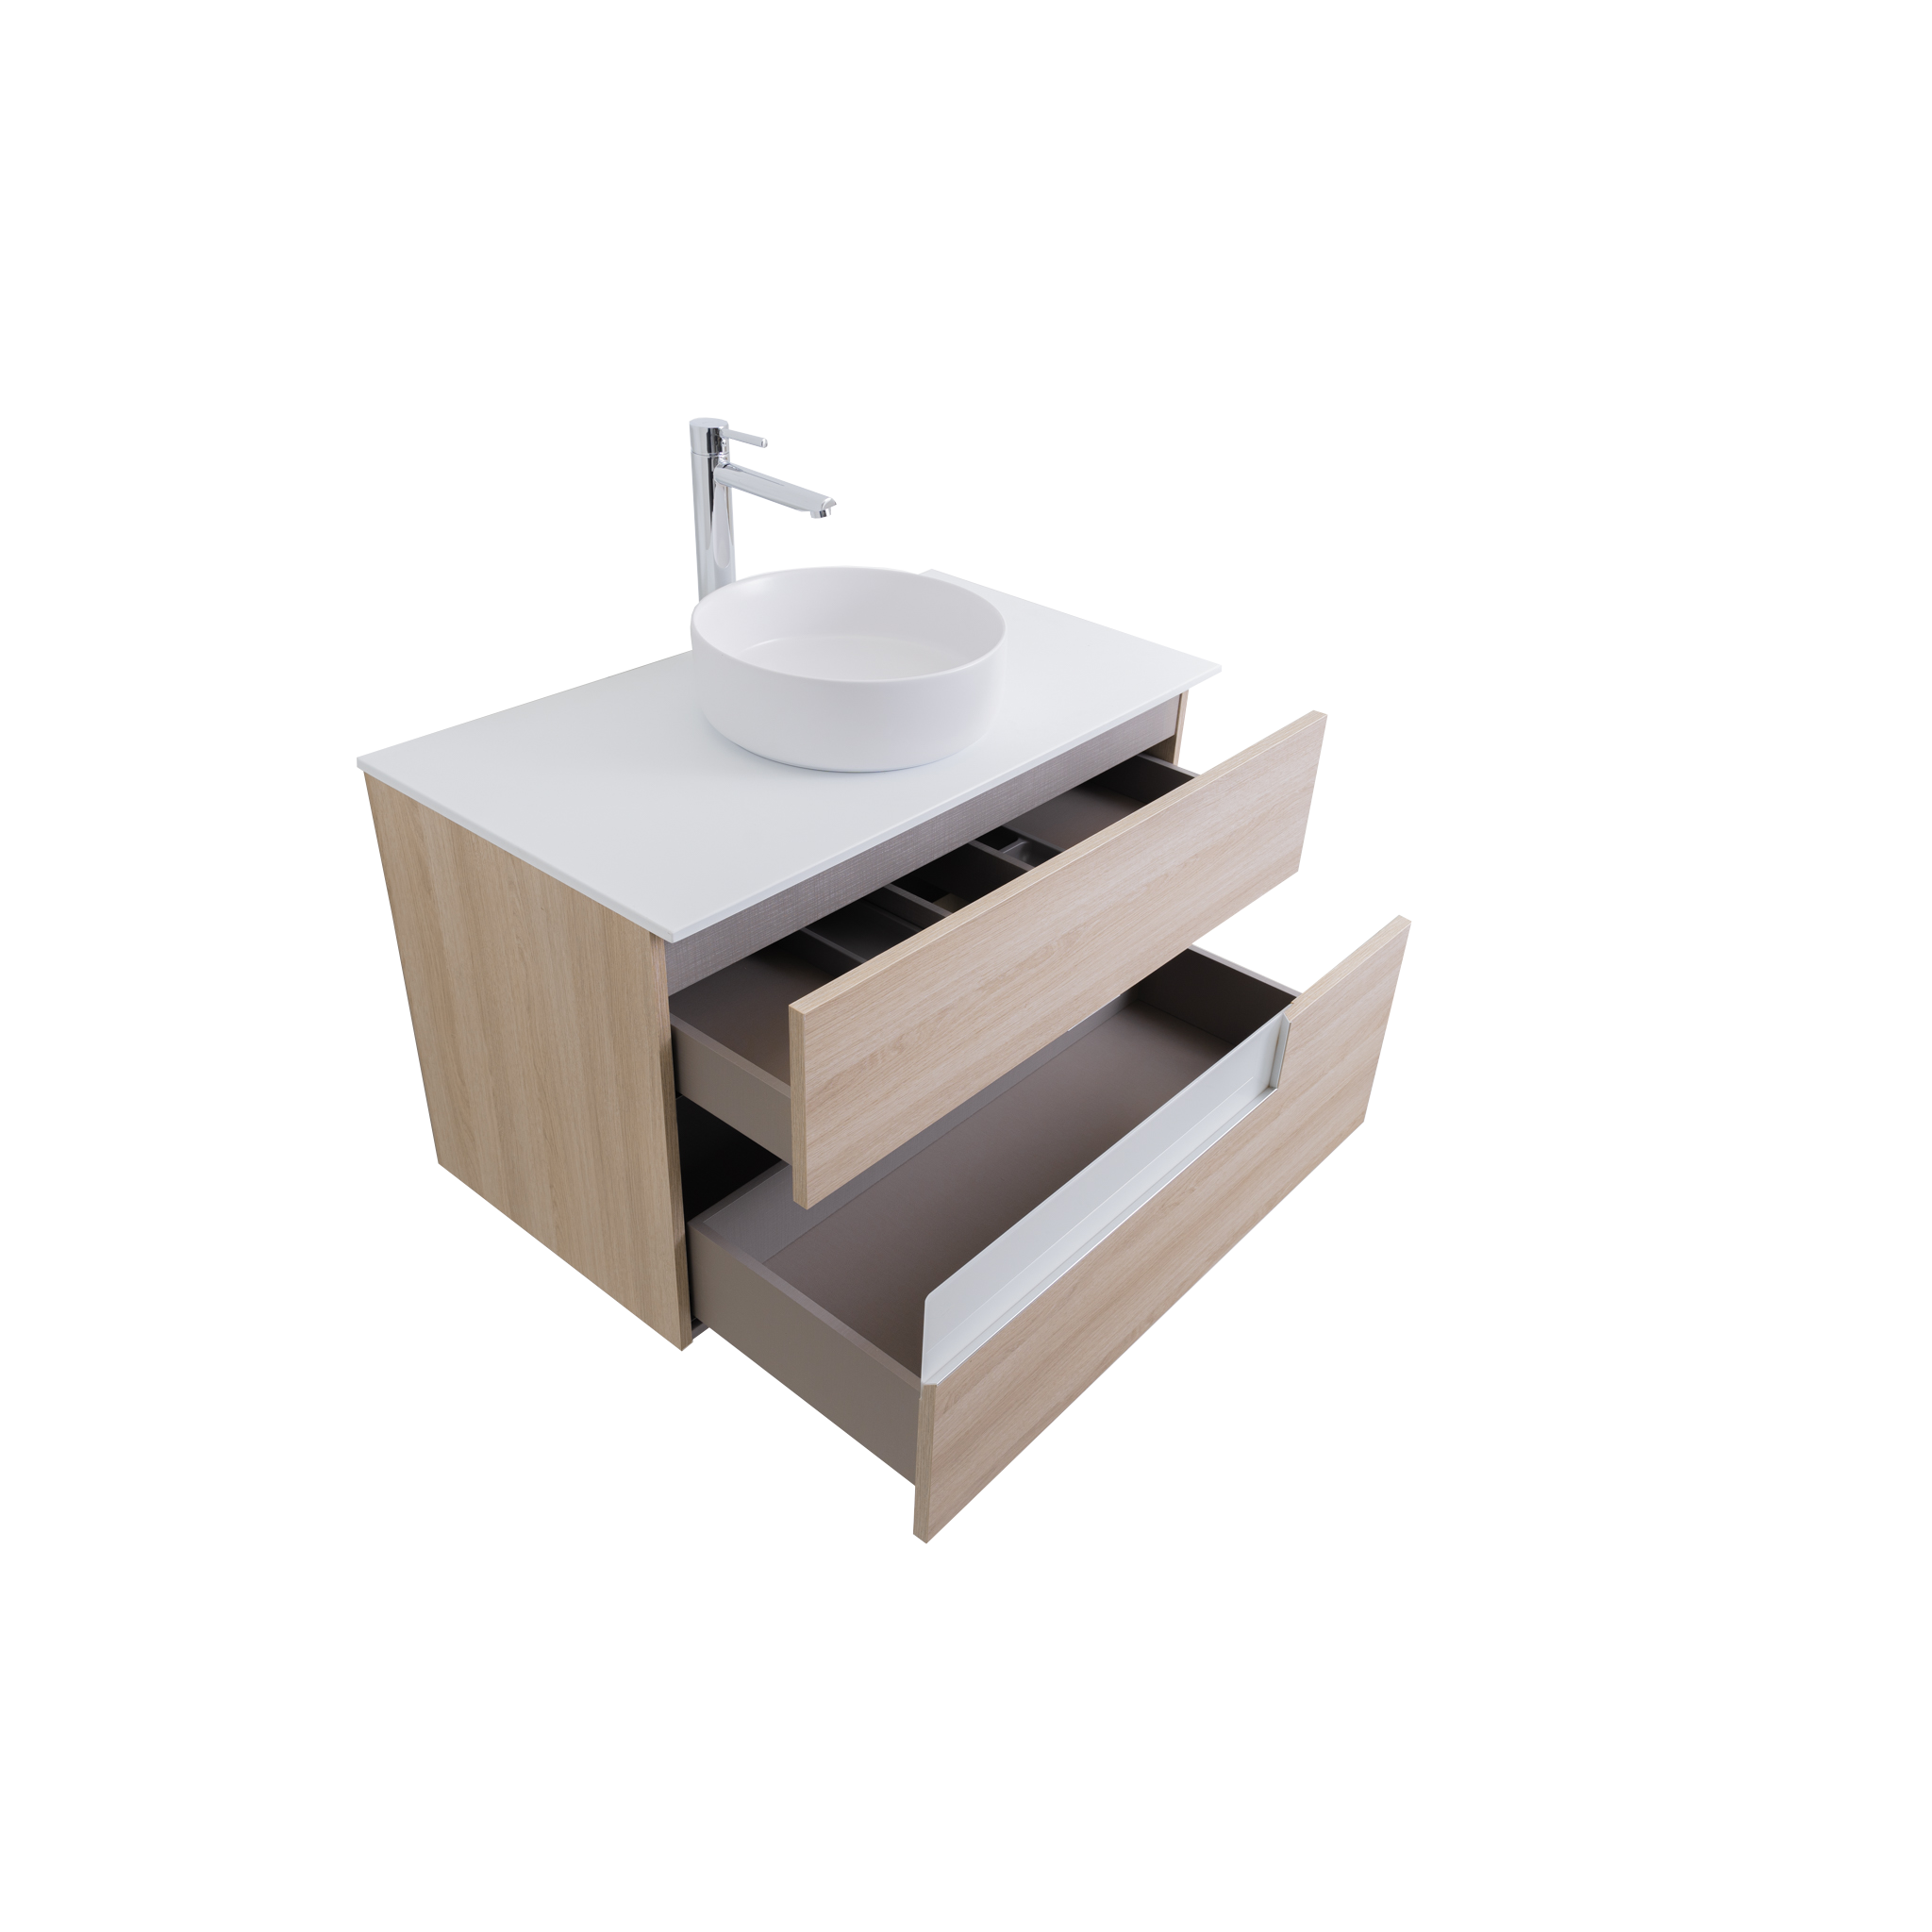 Vision 39.5 Natural Light Wood Cabinet, Ares White Top And Ares White Ceramic Basin, Wall Mounted Modern Vanity Set